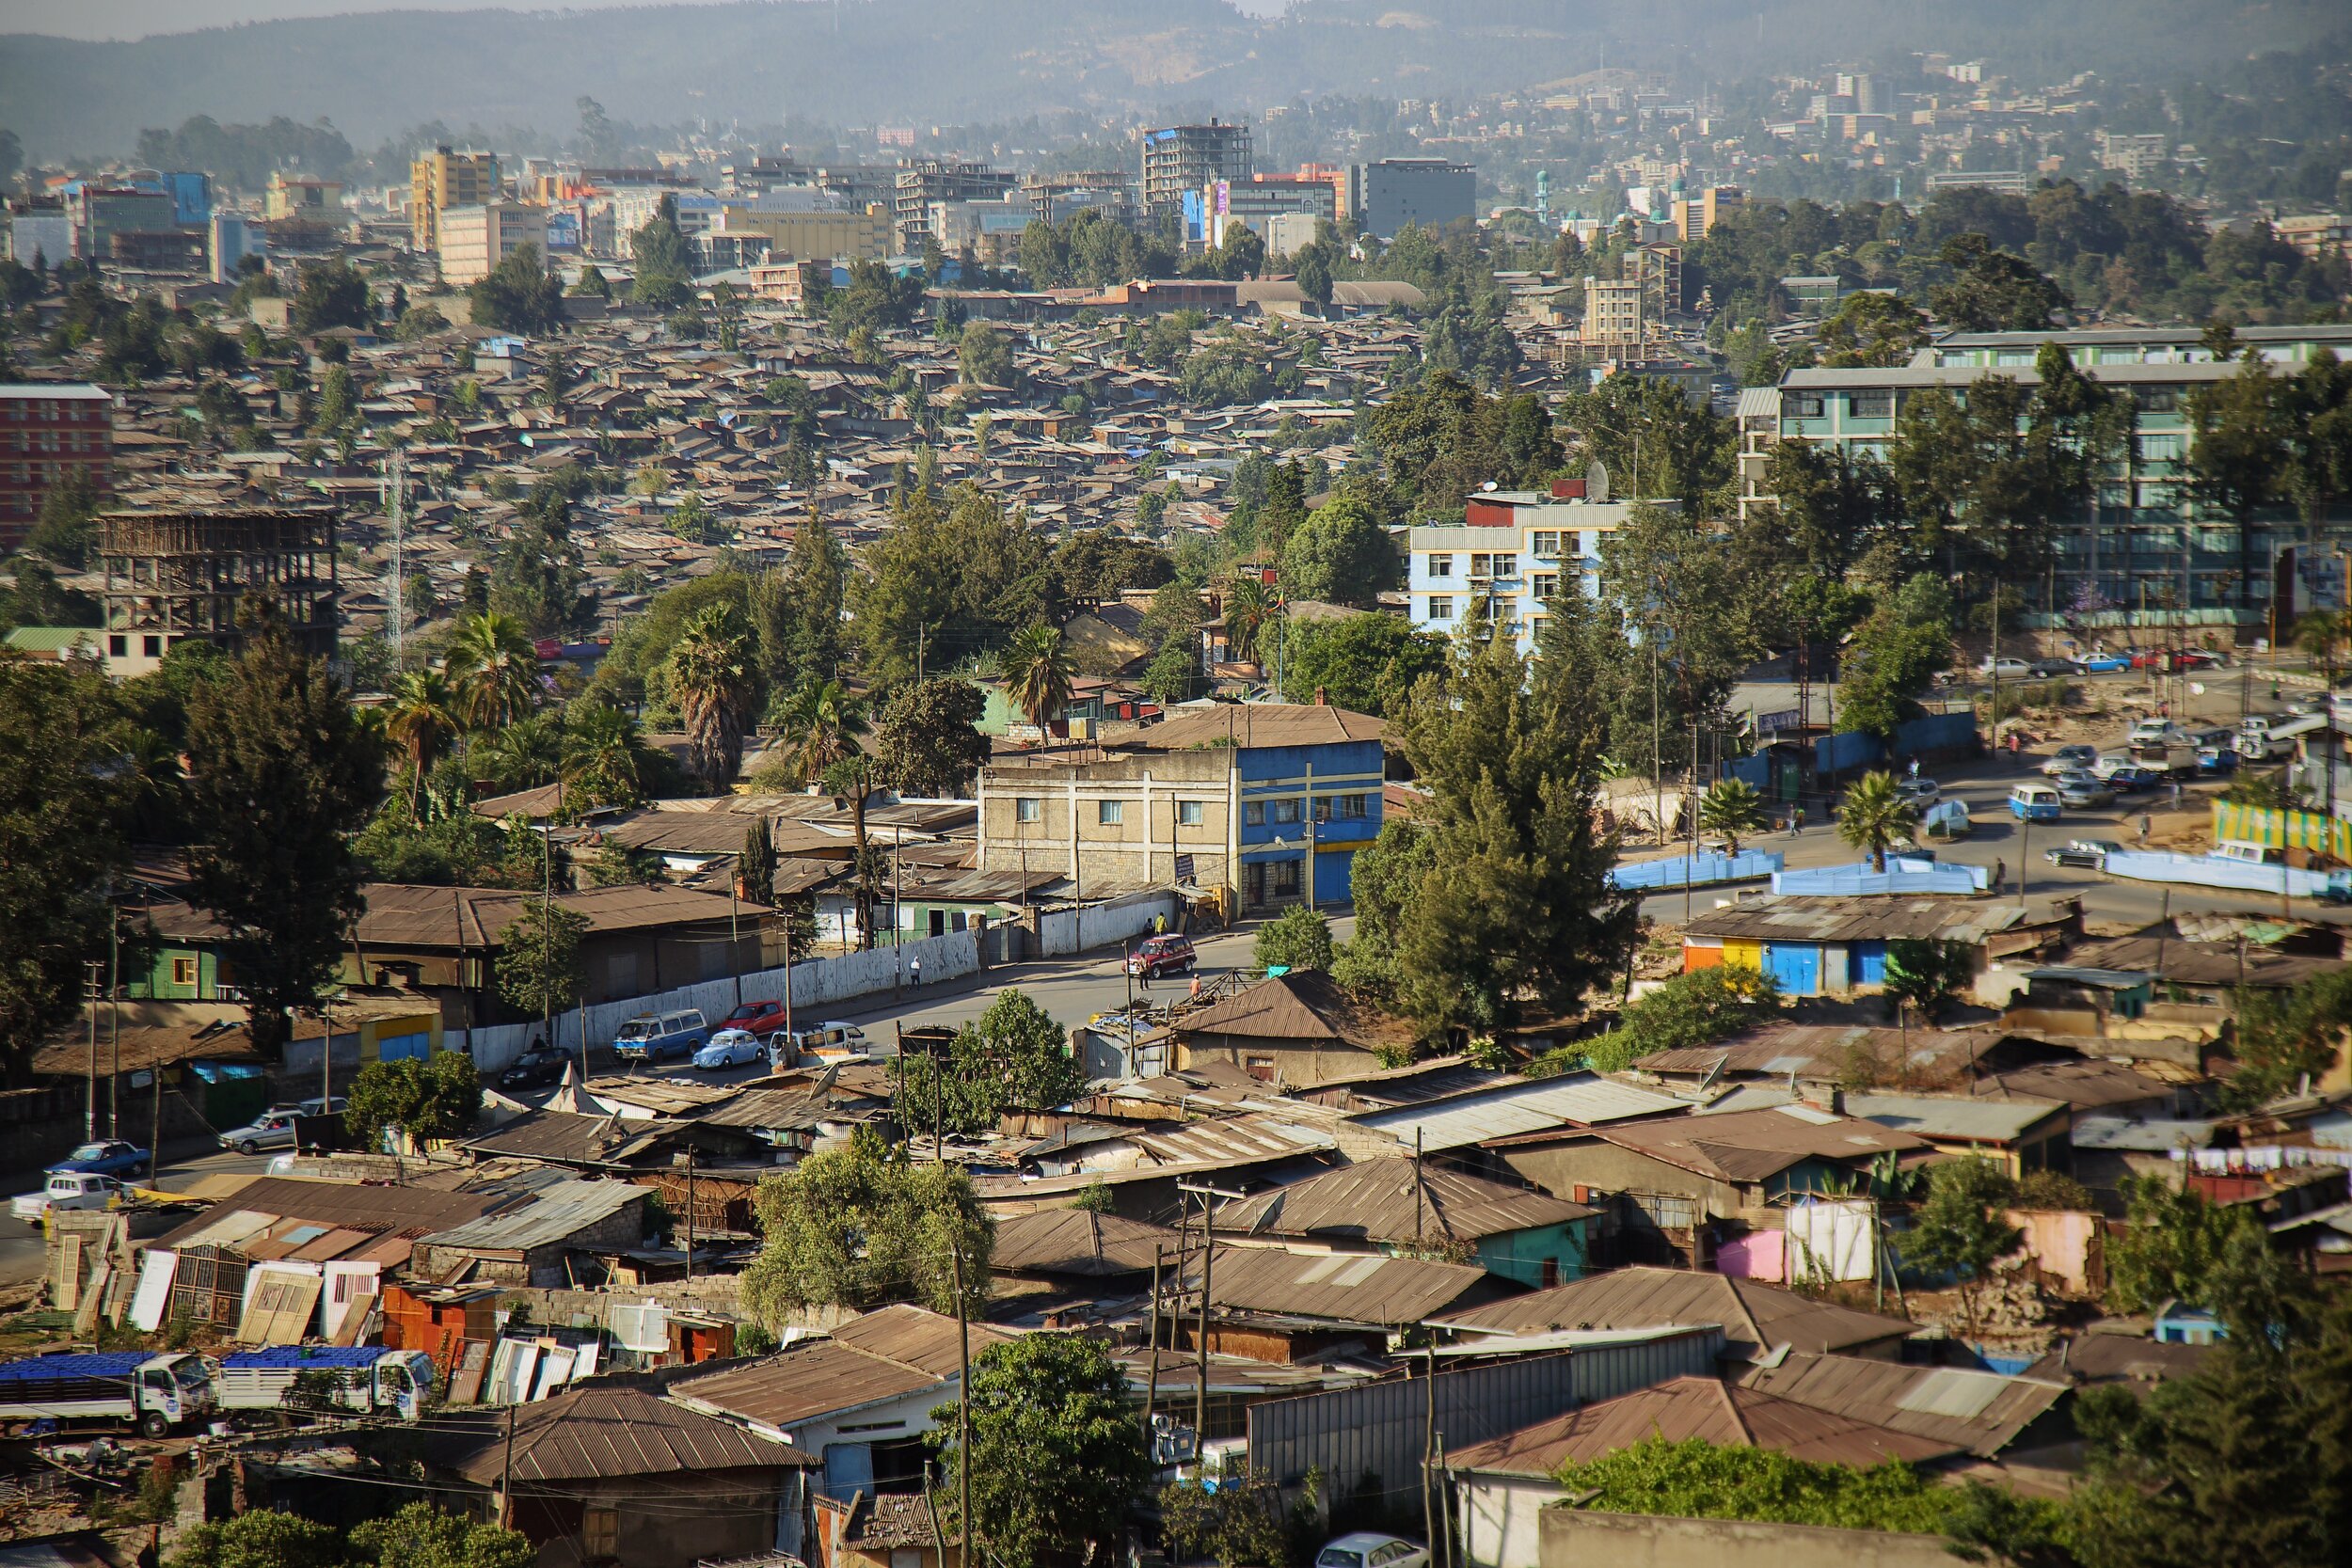  The typical urban fabric of the existing neighborhoods of Addis Ababa is comprised of low-rise, low-density housing, made of materials such as wood and mud. The lack of access to services is predominant. 